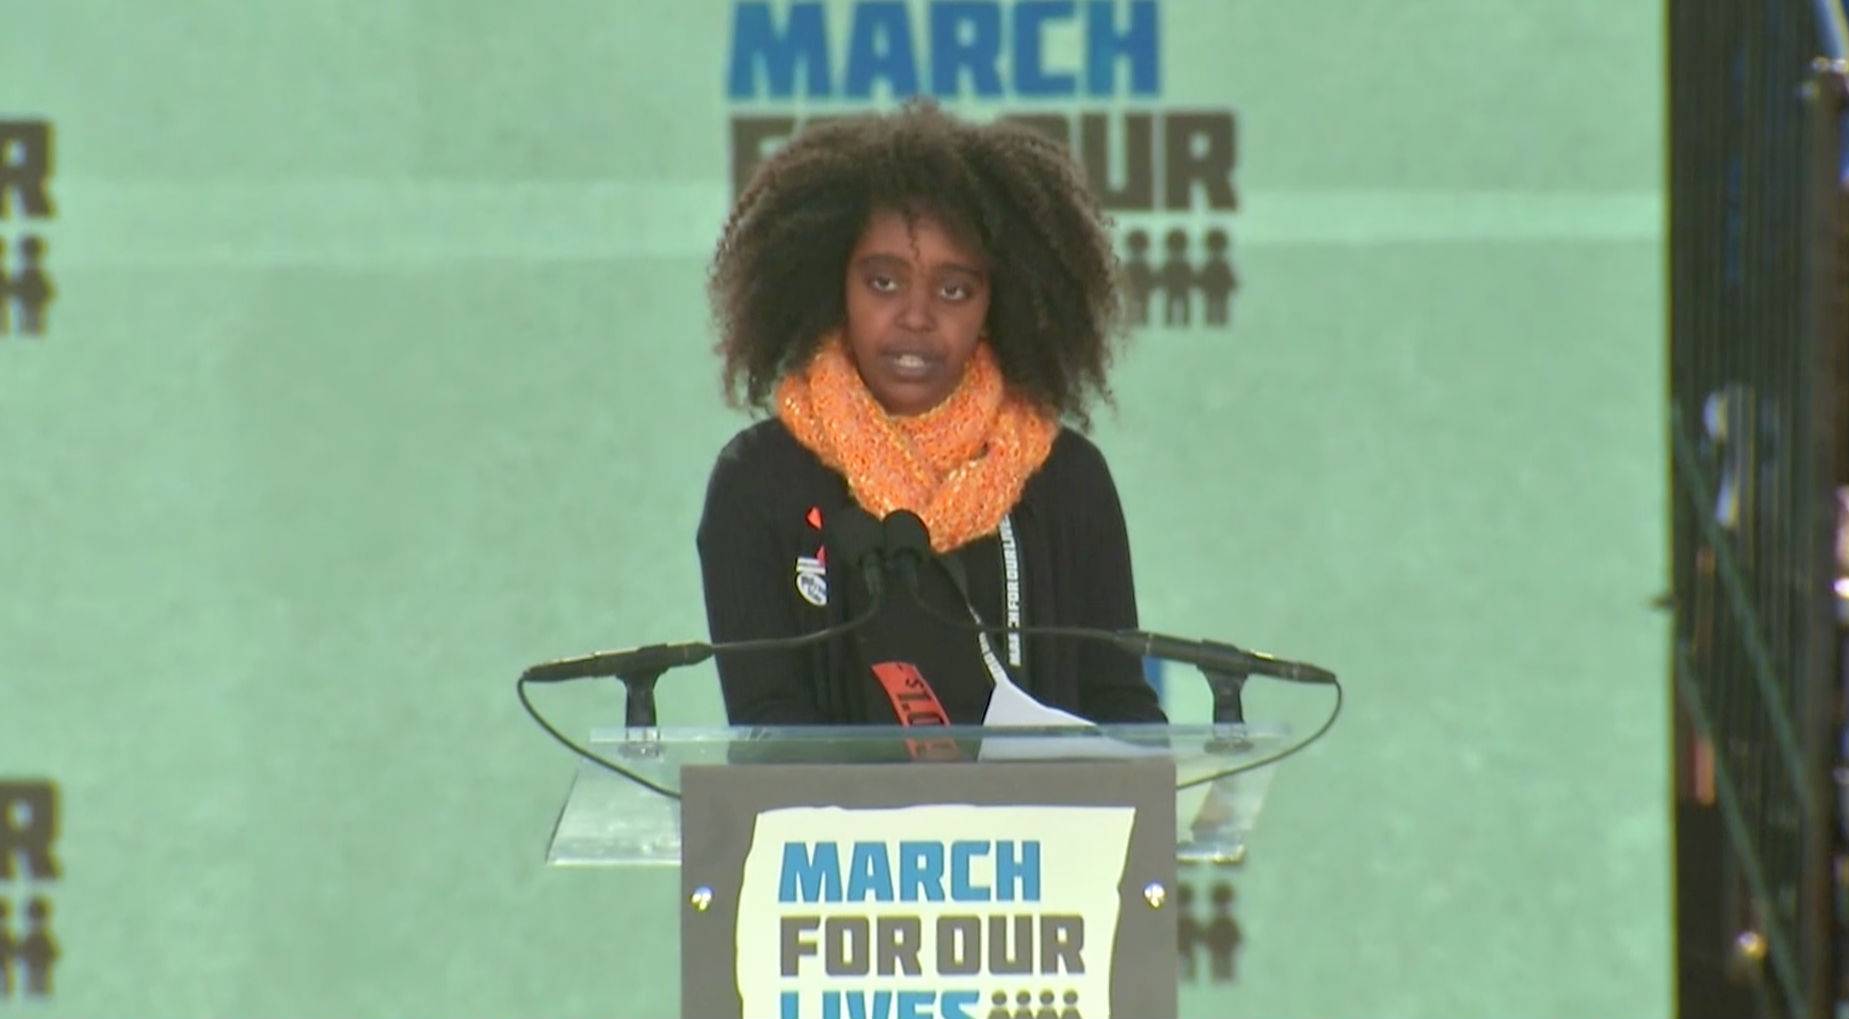 11-Year-Old Naomi Wadler wowed the crowd representing girls whose stories don't make the front page of every newspapers.